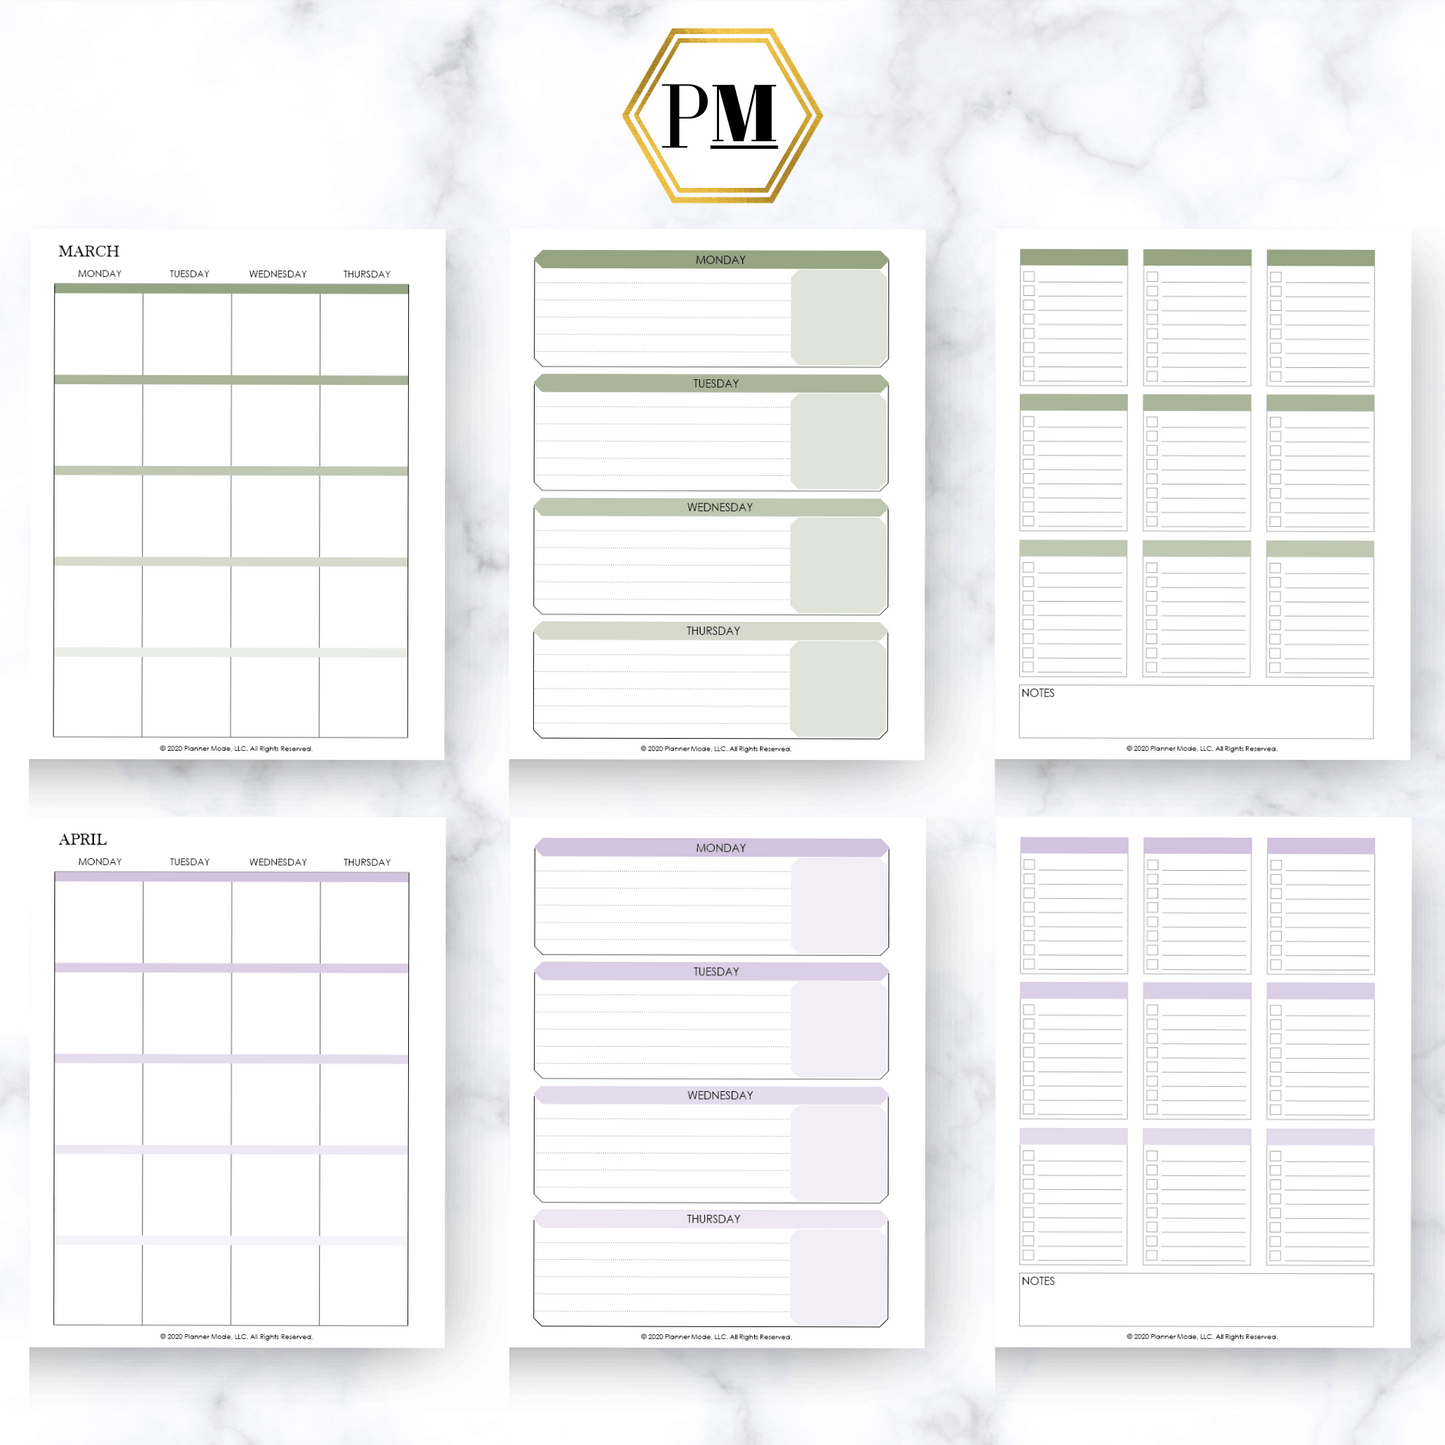 Hope Lifestyle Mode Planner